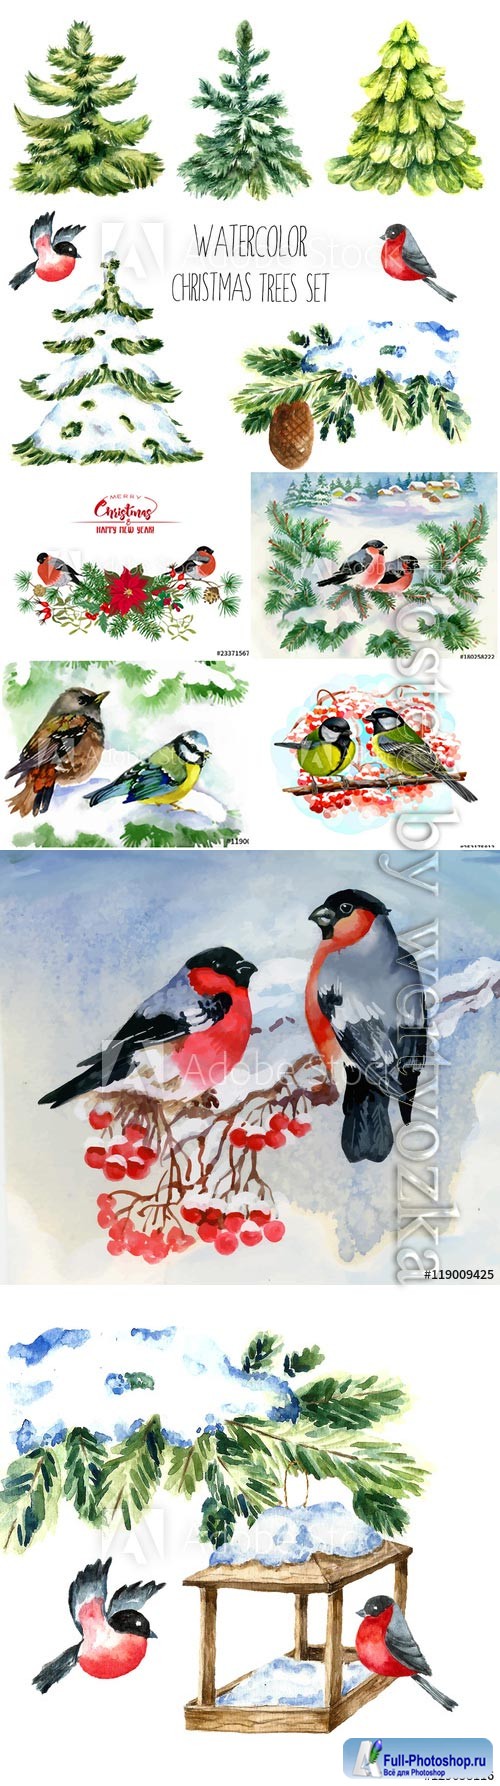 Watercolor christmas trees, birds on snowy tree branch